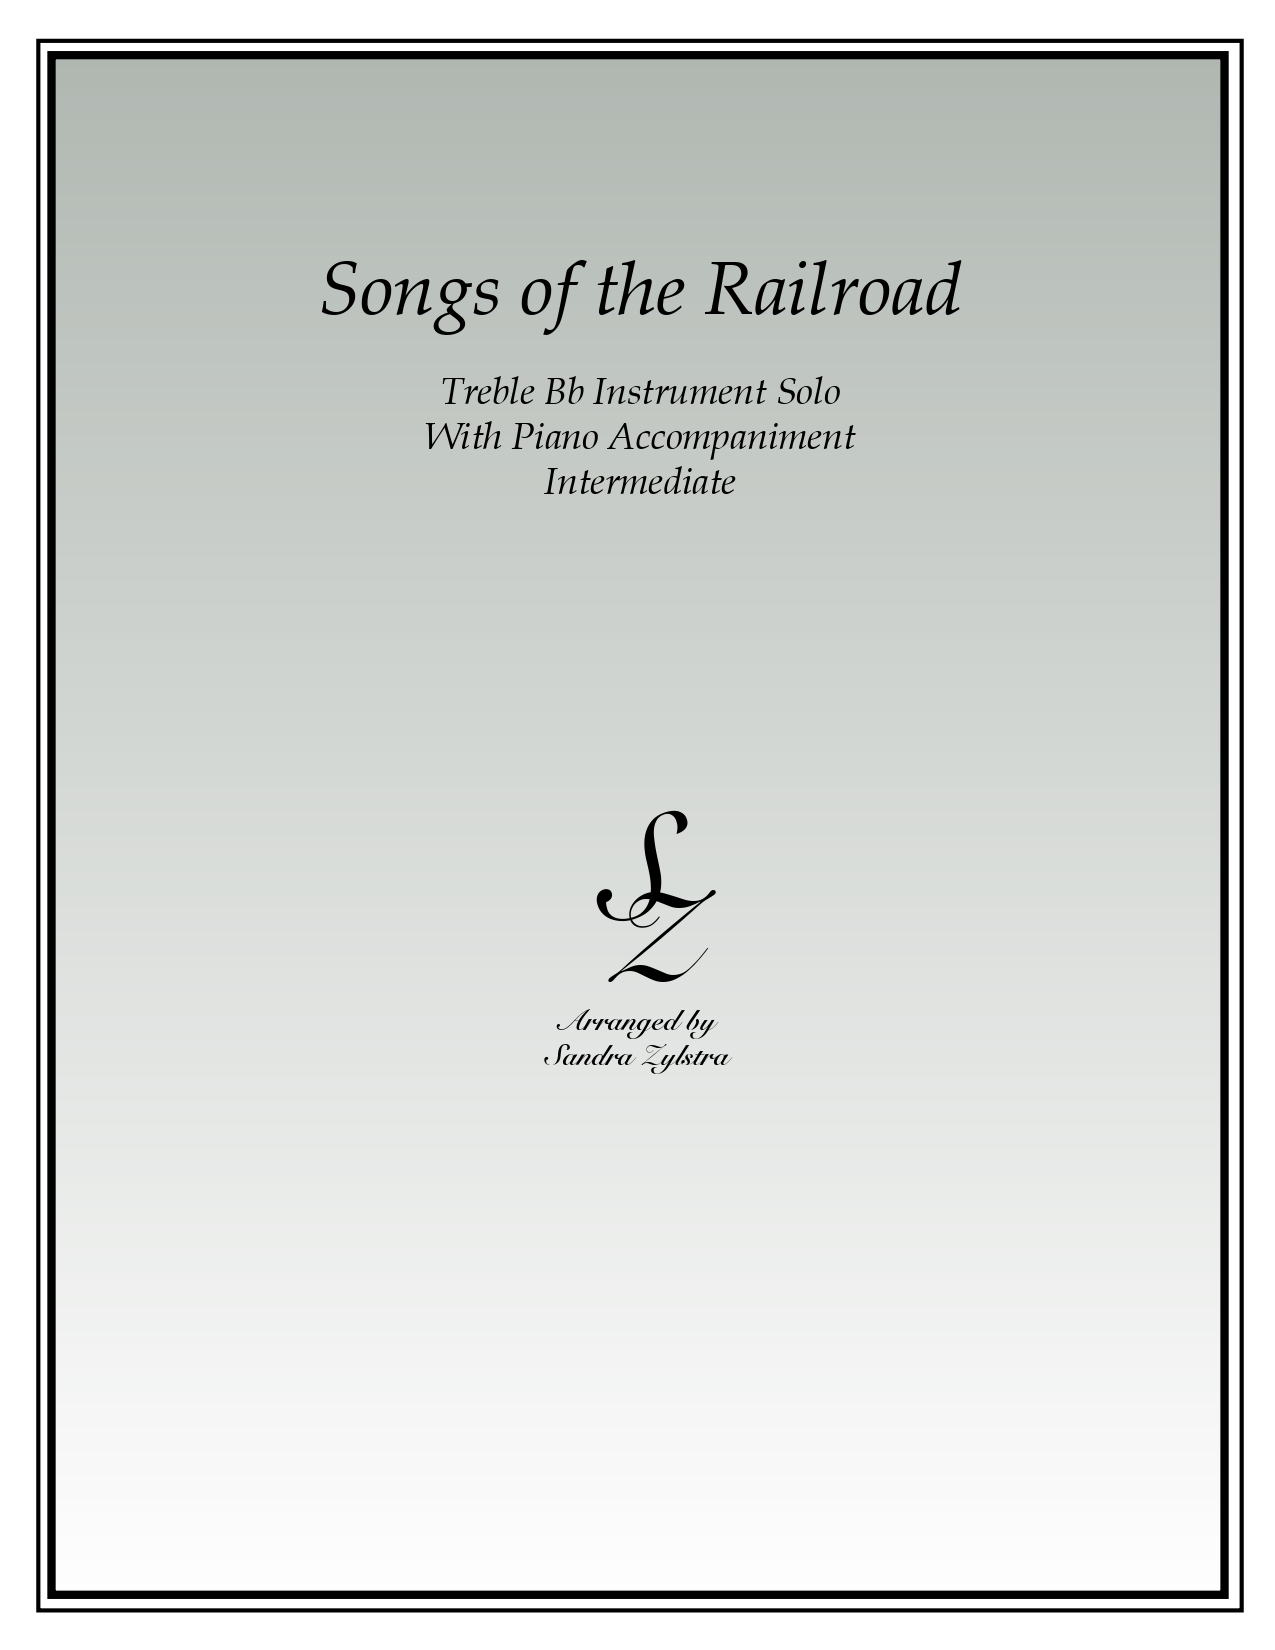 Songs Of The Railroad Bb instrument solo part cover page 00011